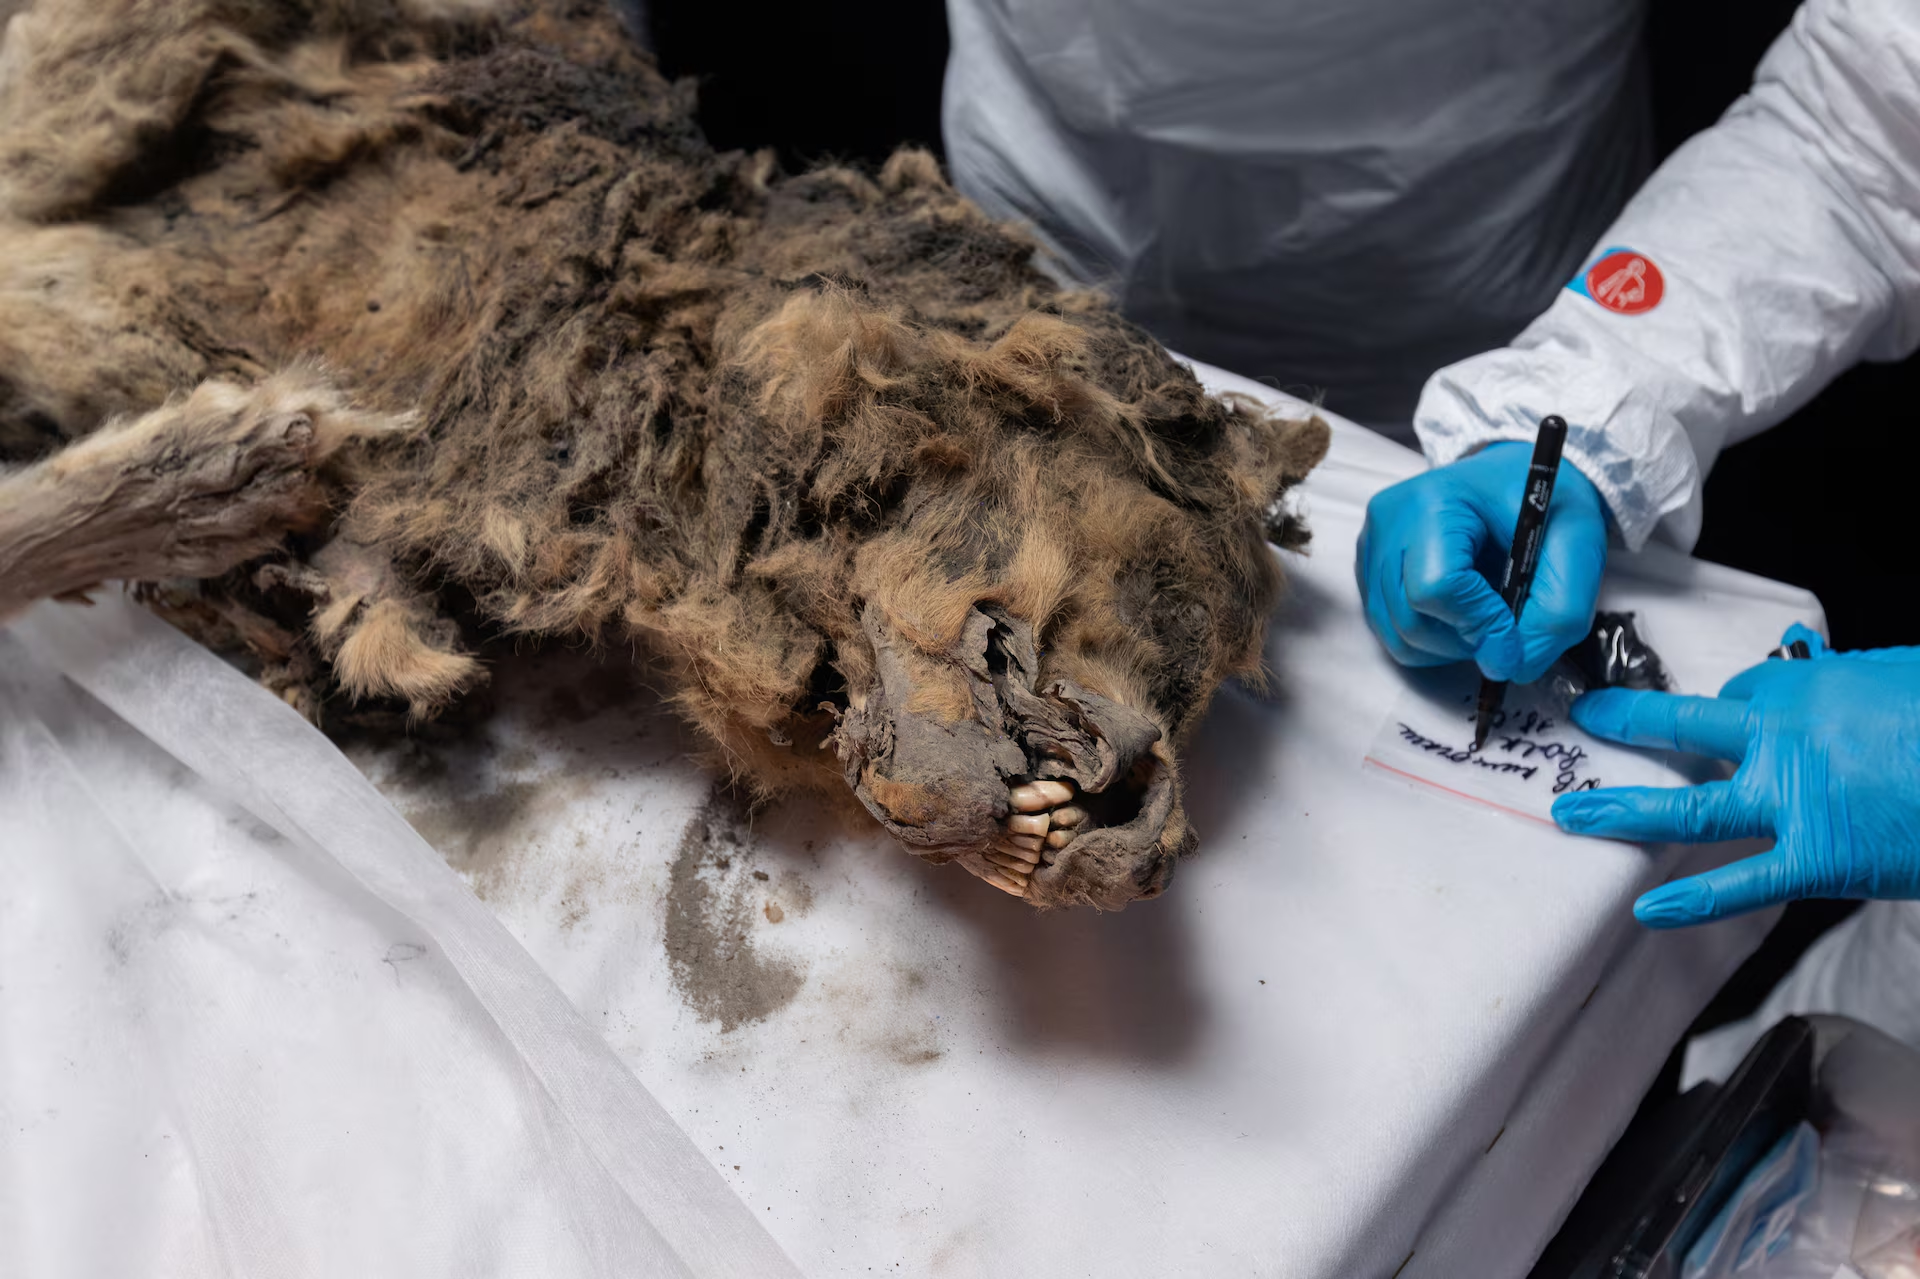 Russian scientists conduct autopsy on 44,000-year-old permafrost wolf carcass